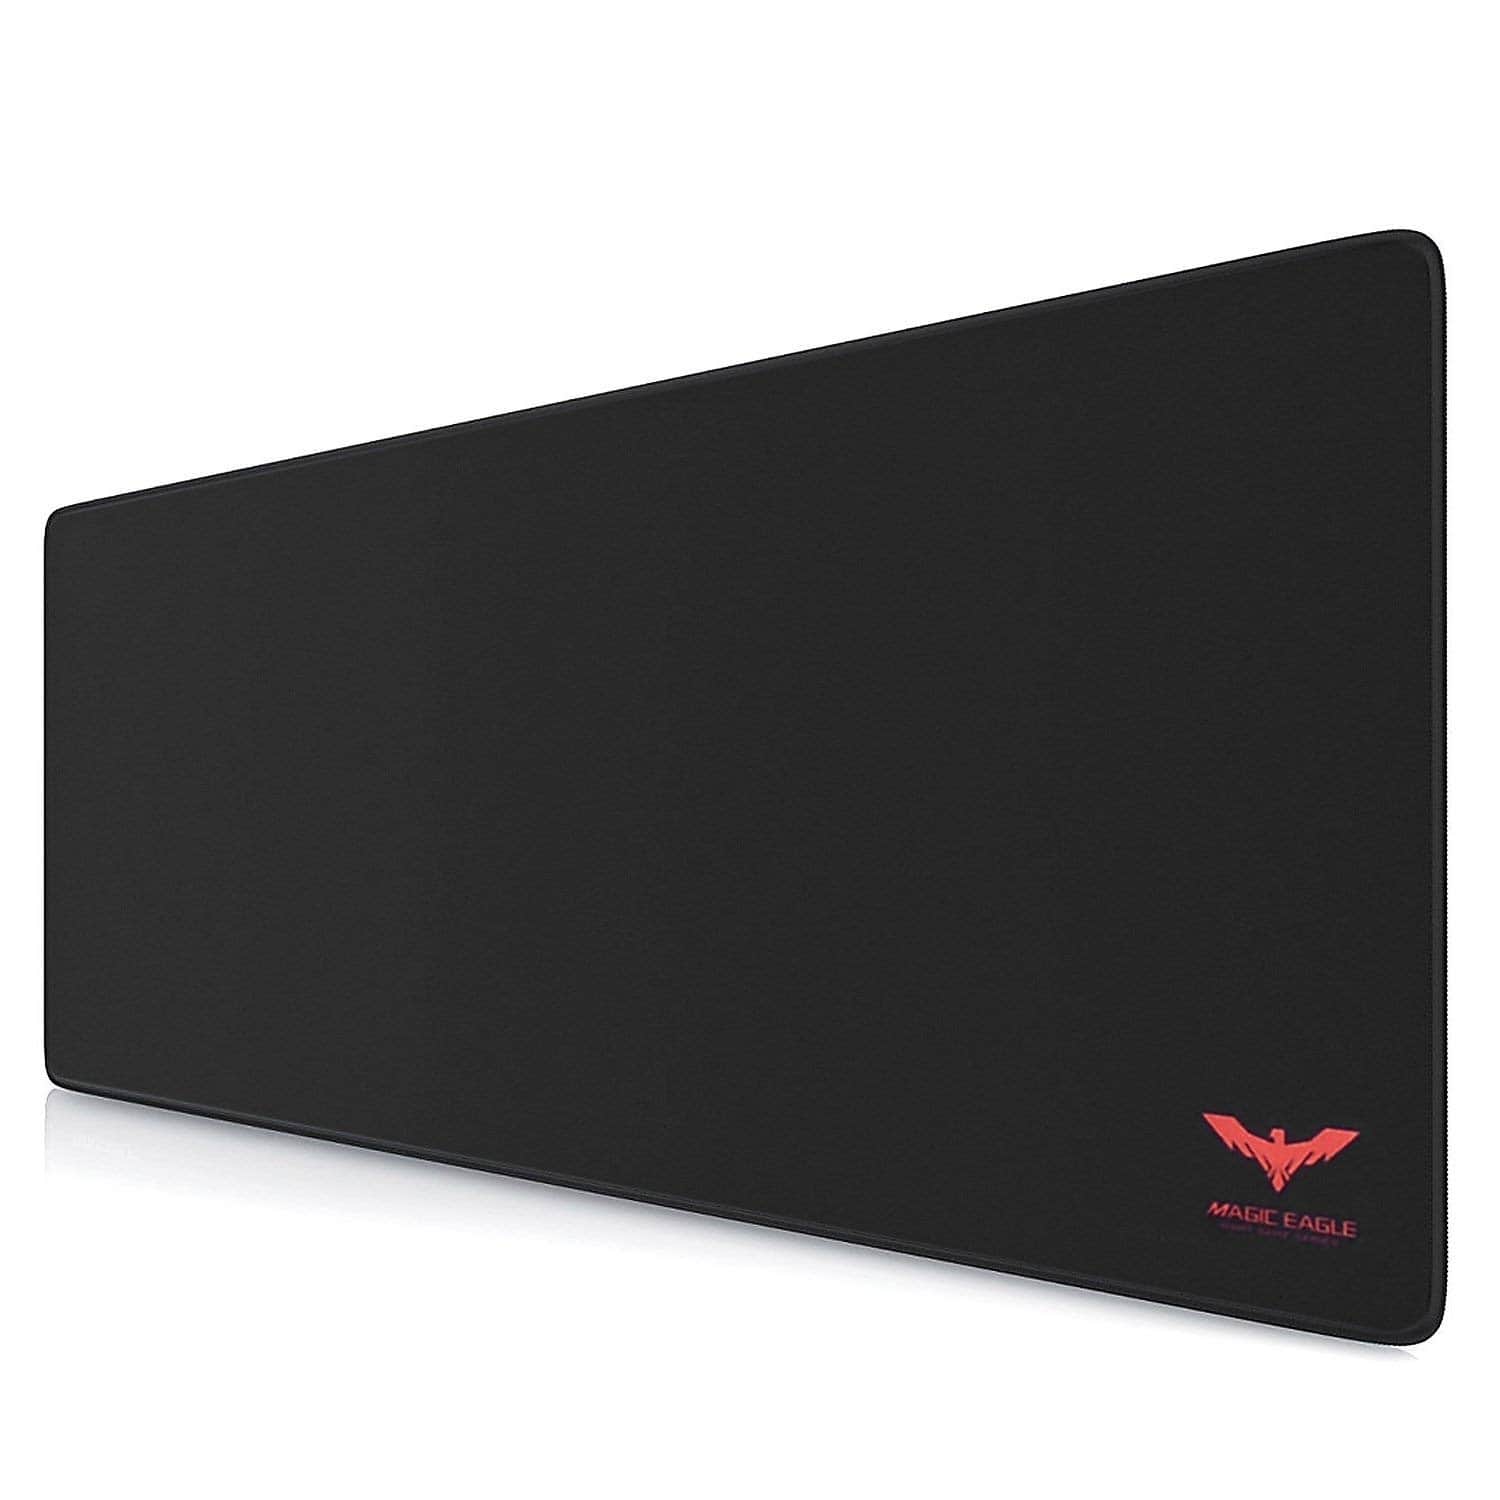 HAVIT HV-MP855 Extended Mouse Mat / Pad with Waterproof & Non-Slip Rubber Base